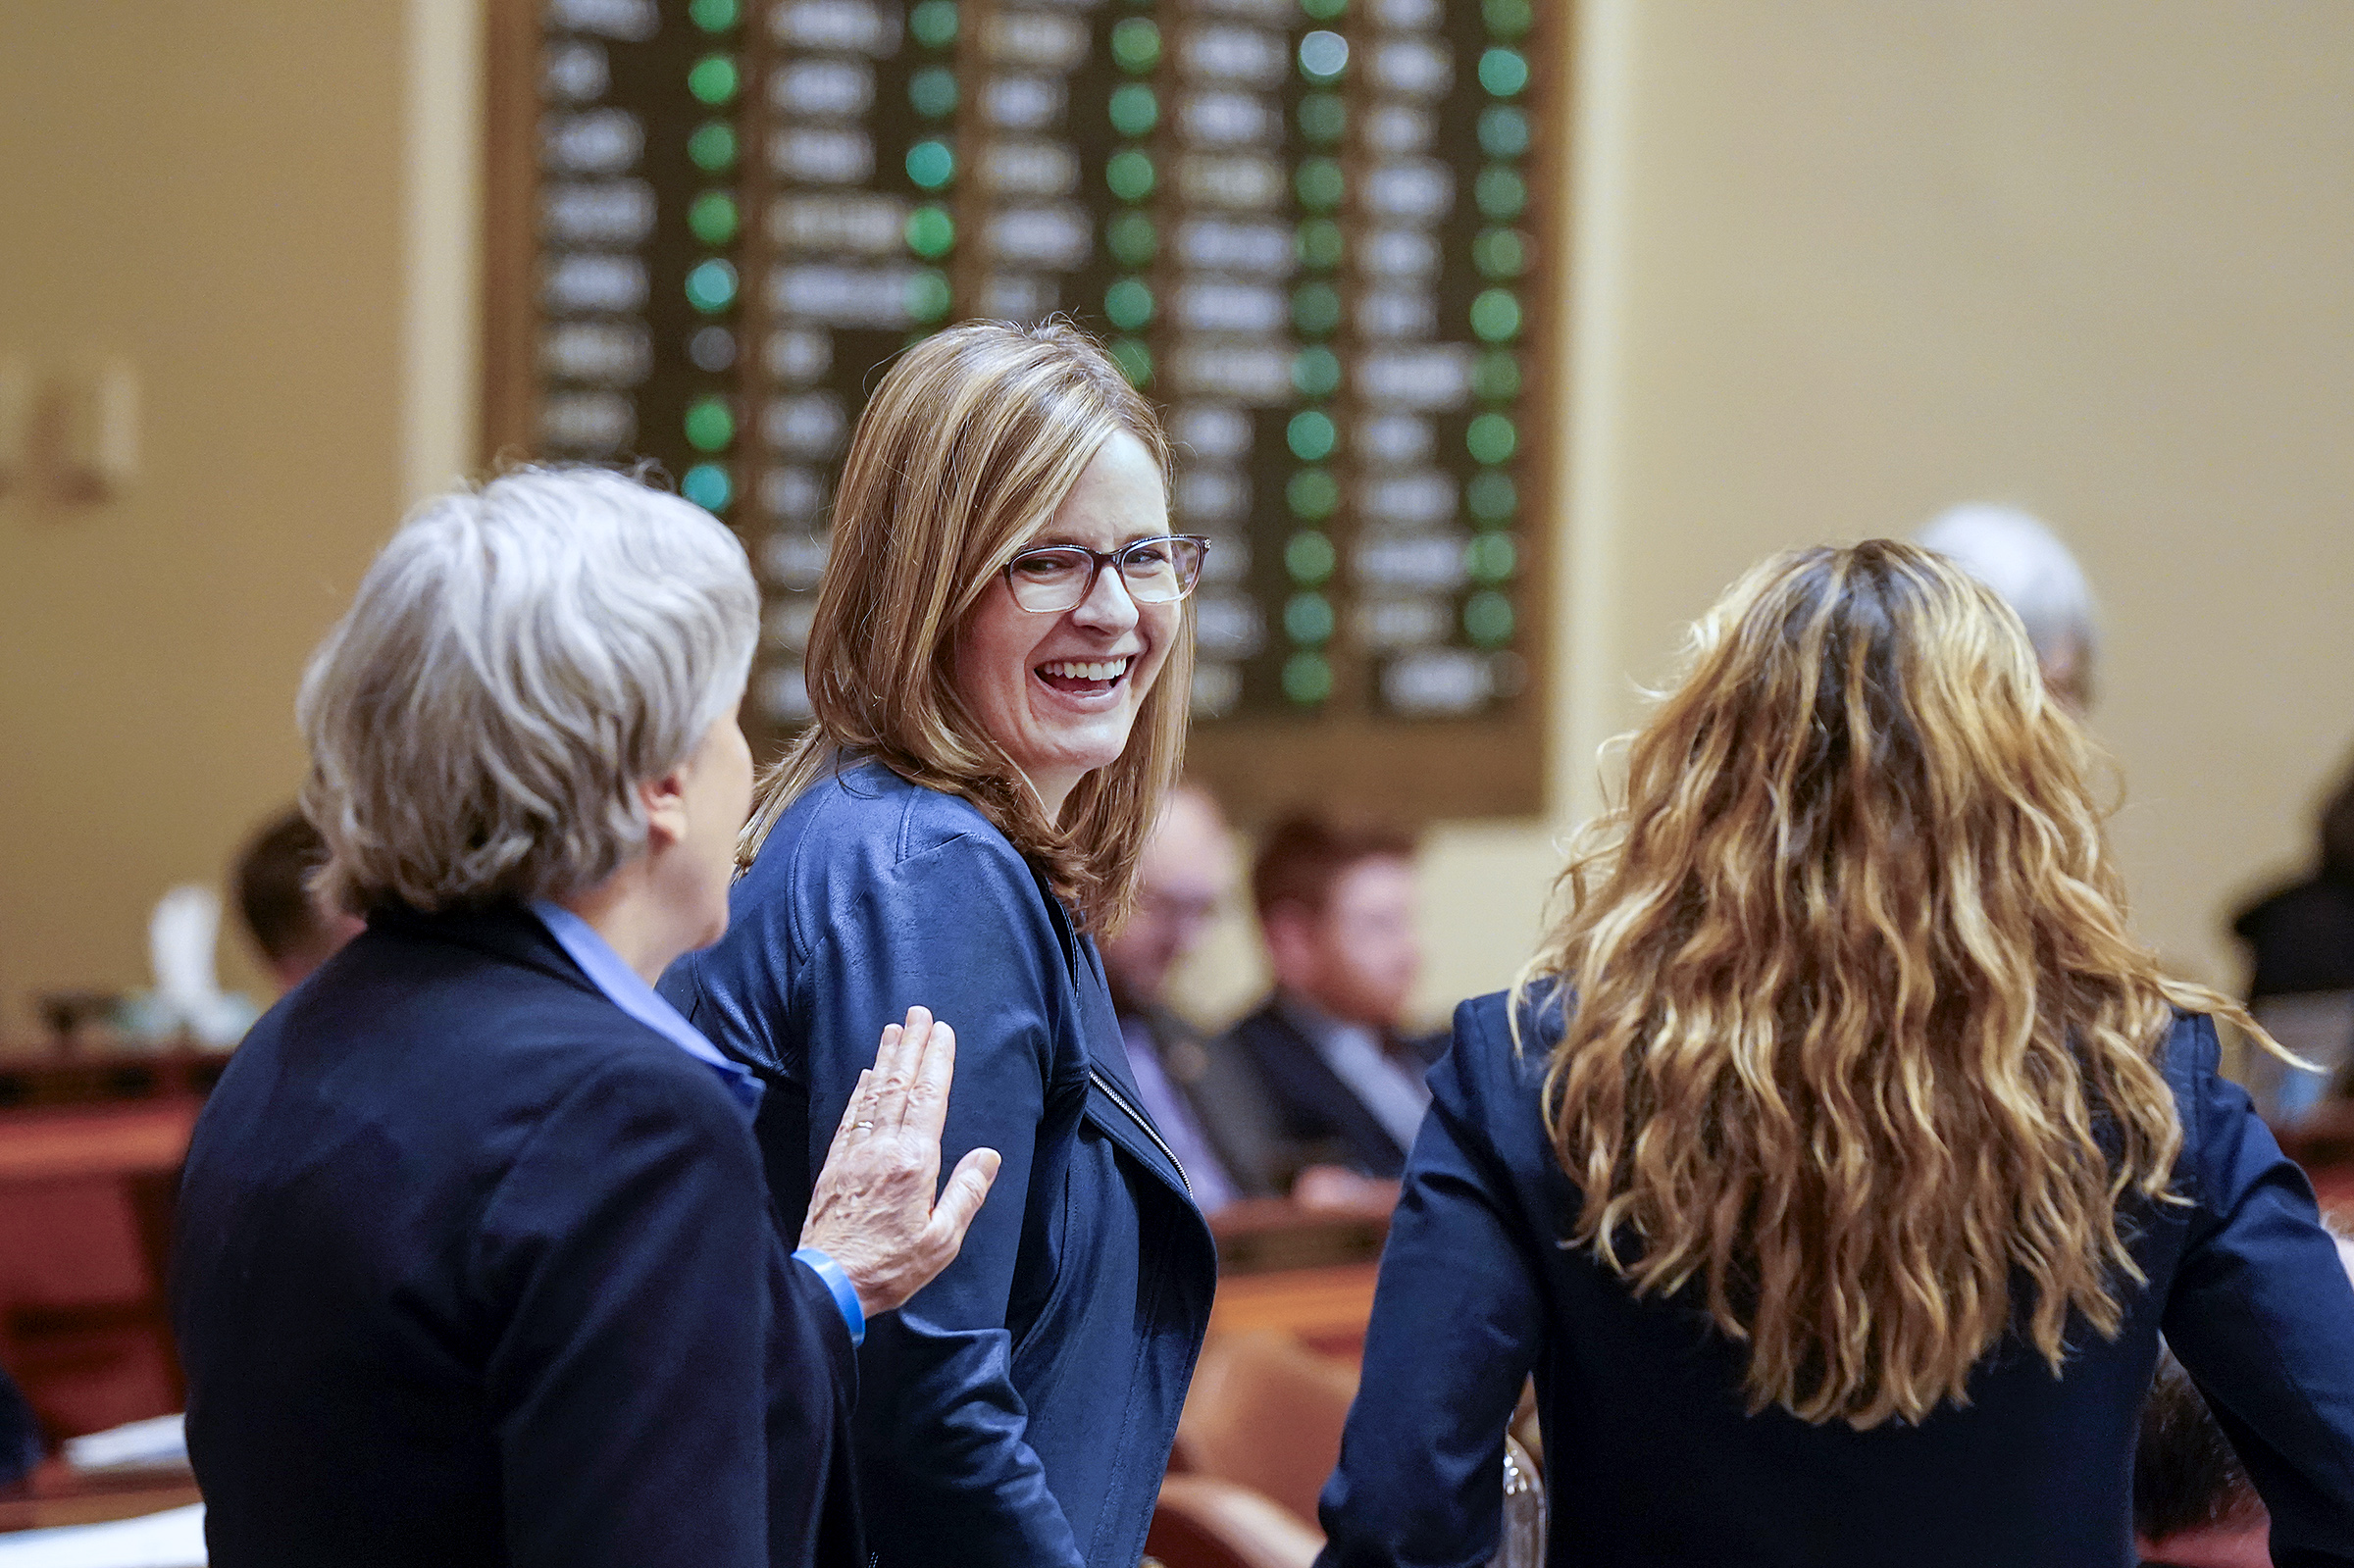 Rep. Kelly Moller is congratulated by Rep. Laurie Pryor following the passage of HF3614, the public safety policy bill. The April 8 vote was 130-0. (Photo by Michele Jokinen)